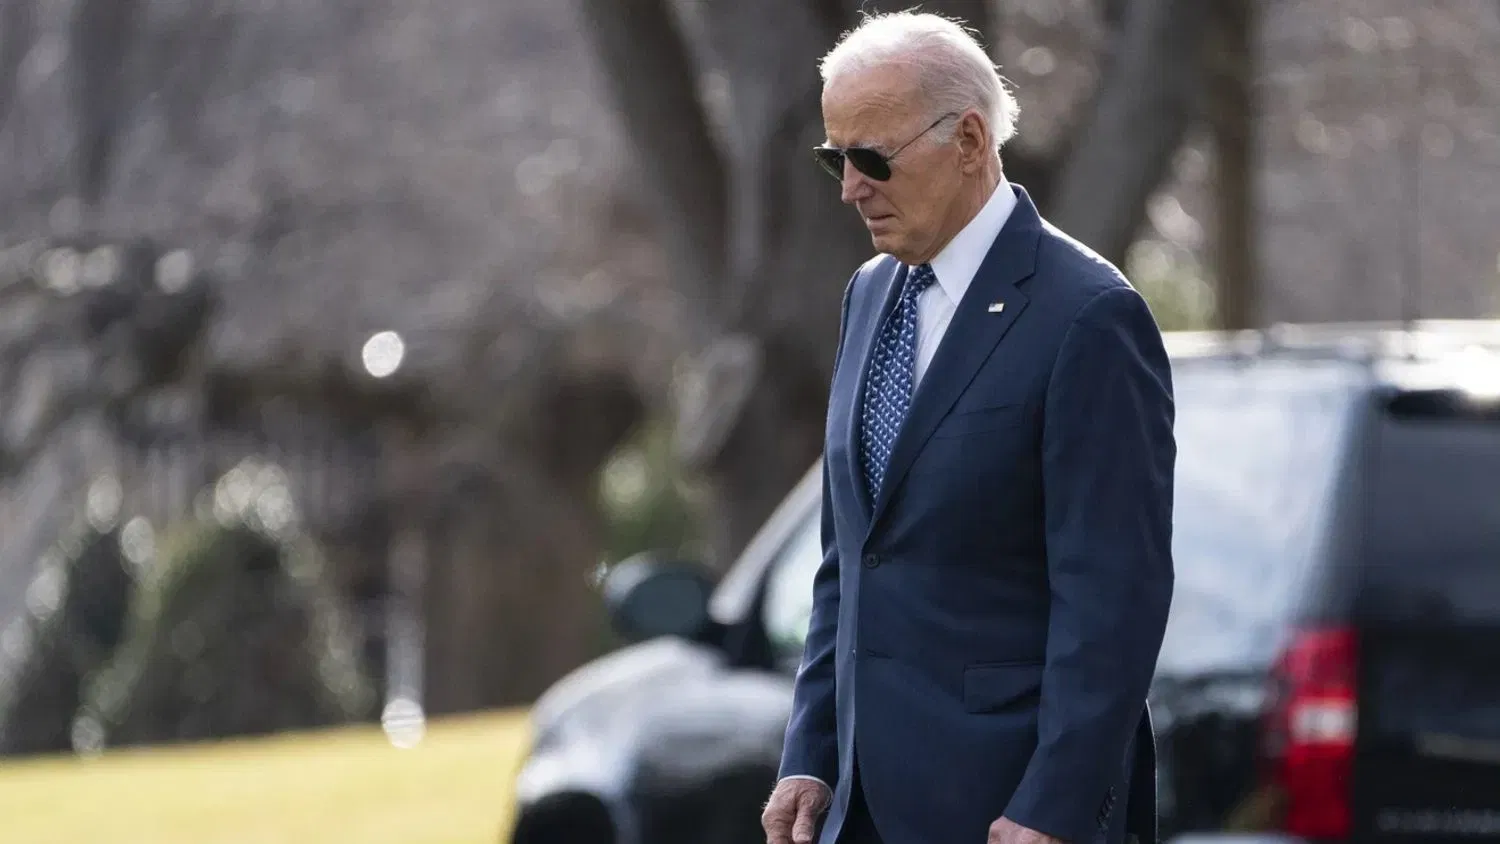 Special counsel says Biden will not be charged over classified